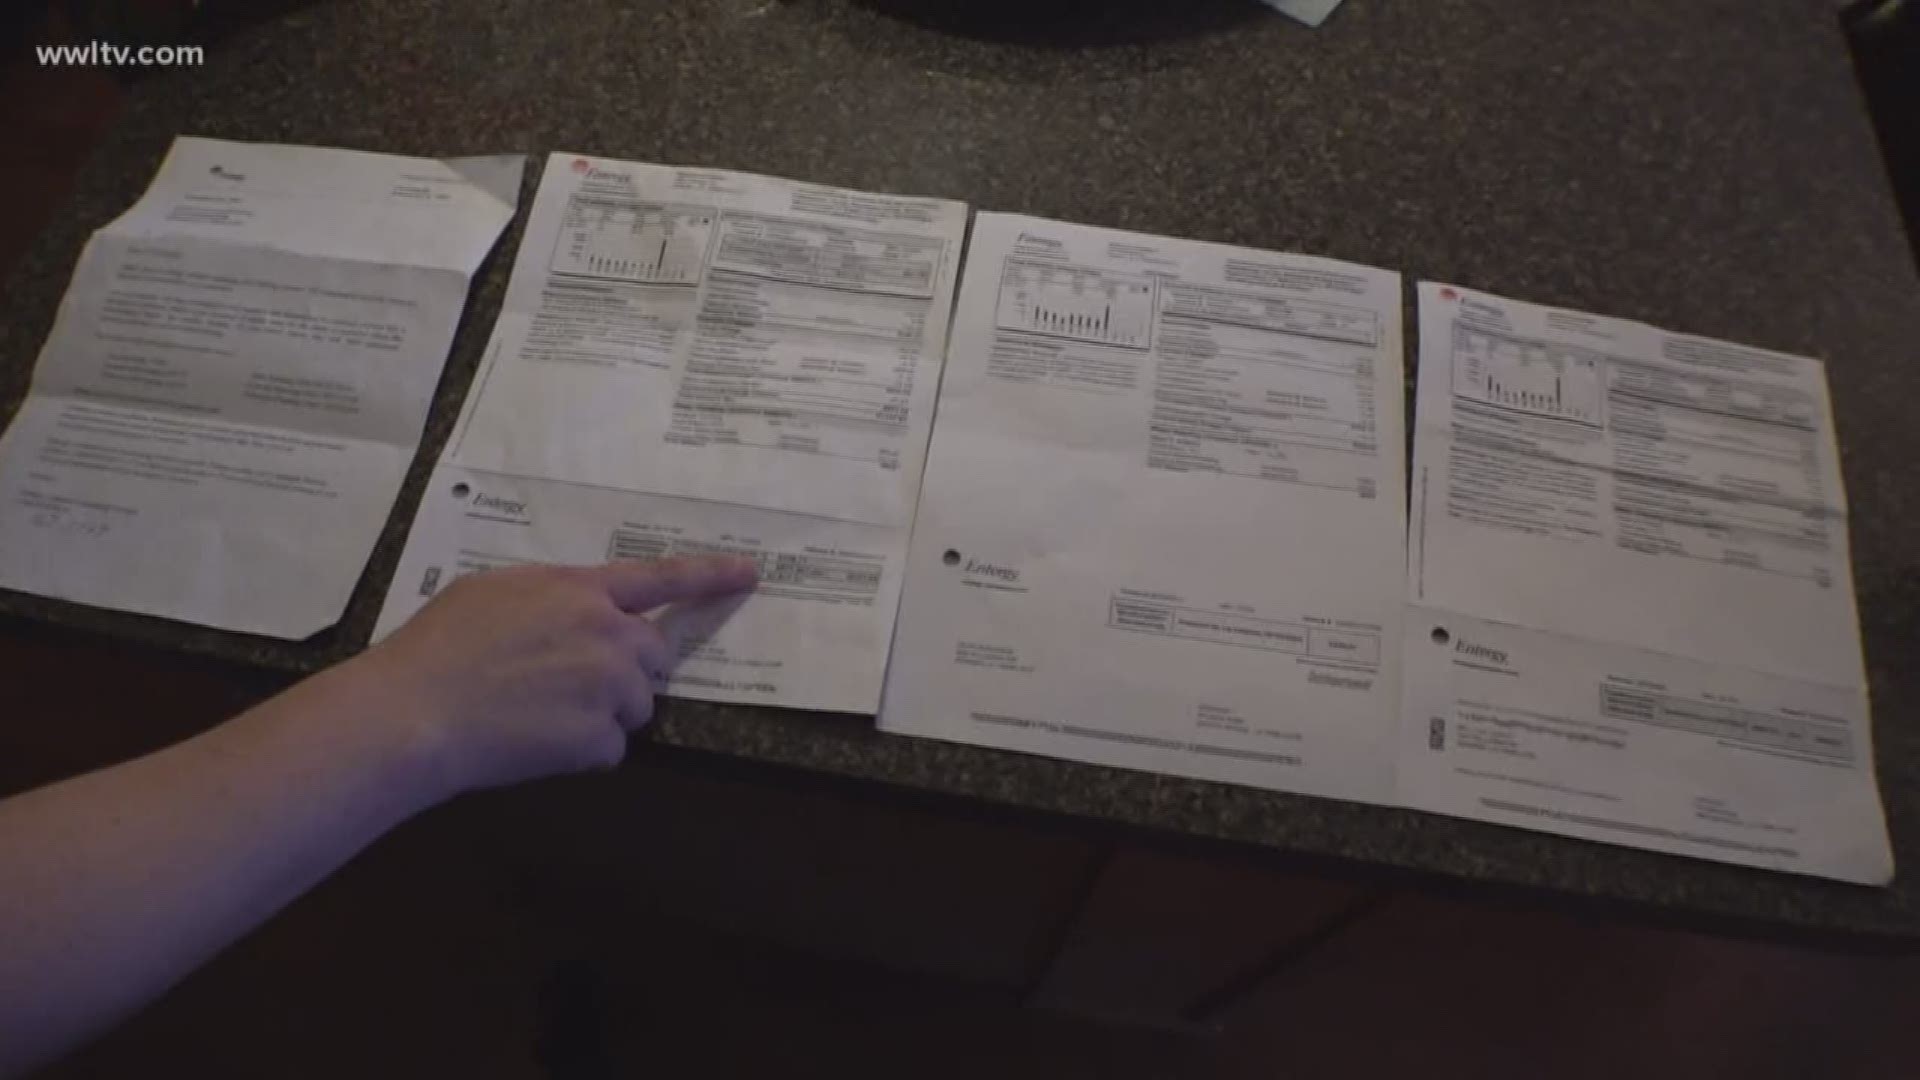 Meter reader was falsifying readings, utility admits